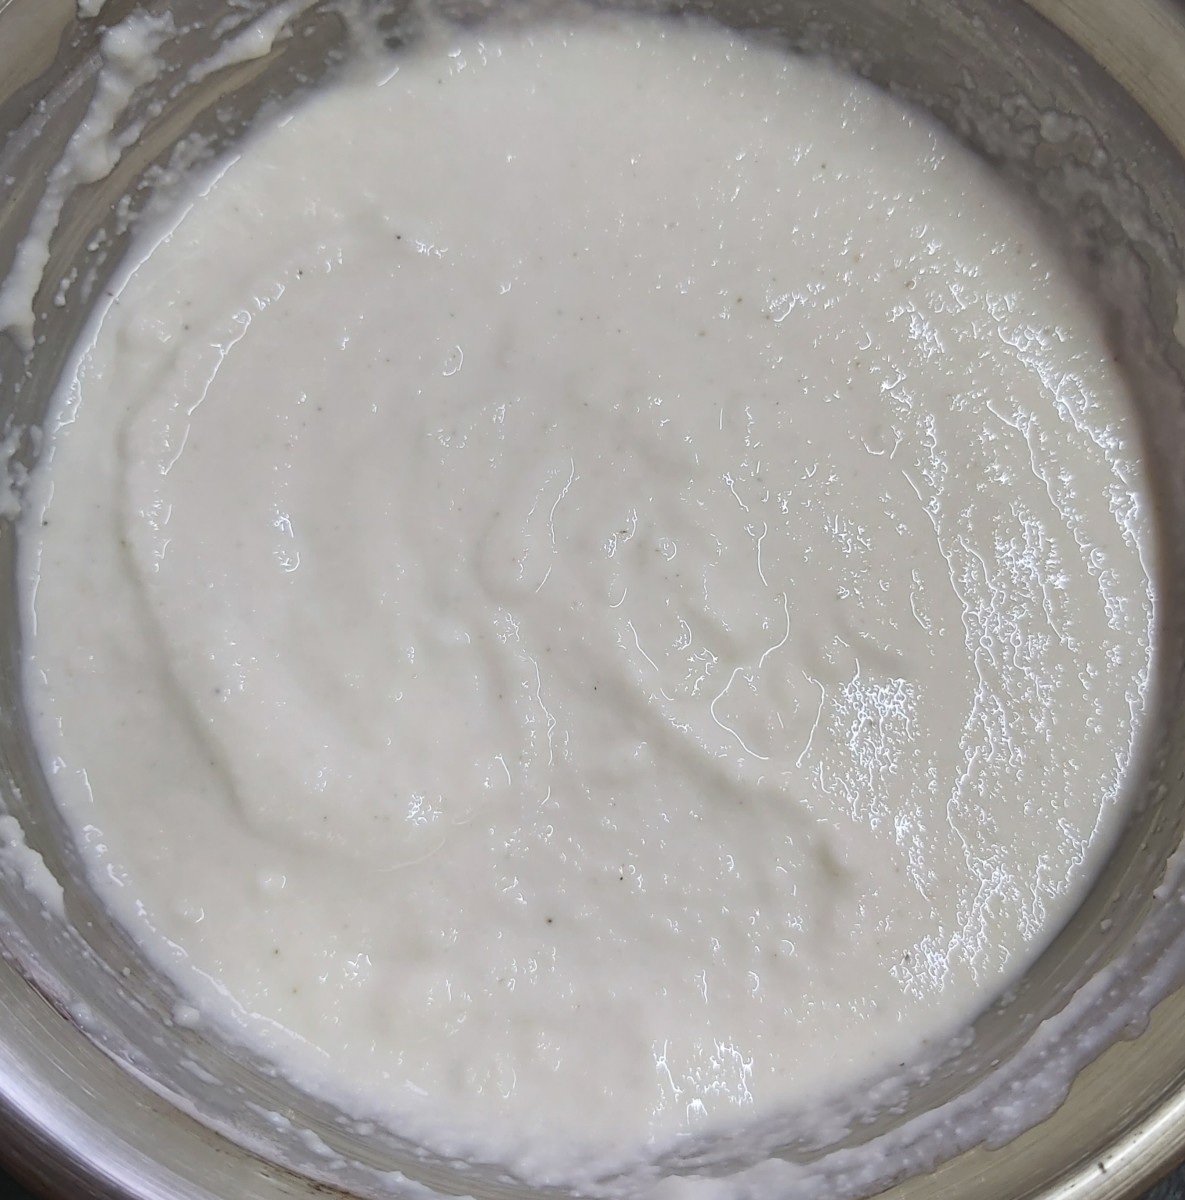 Add salt to taste. Mix everything properly to form thick batter without forming lumps.